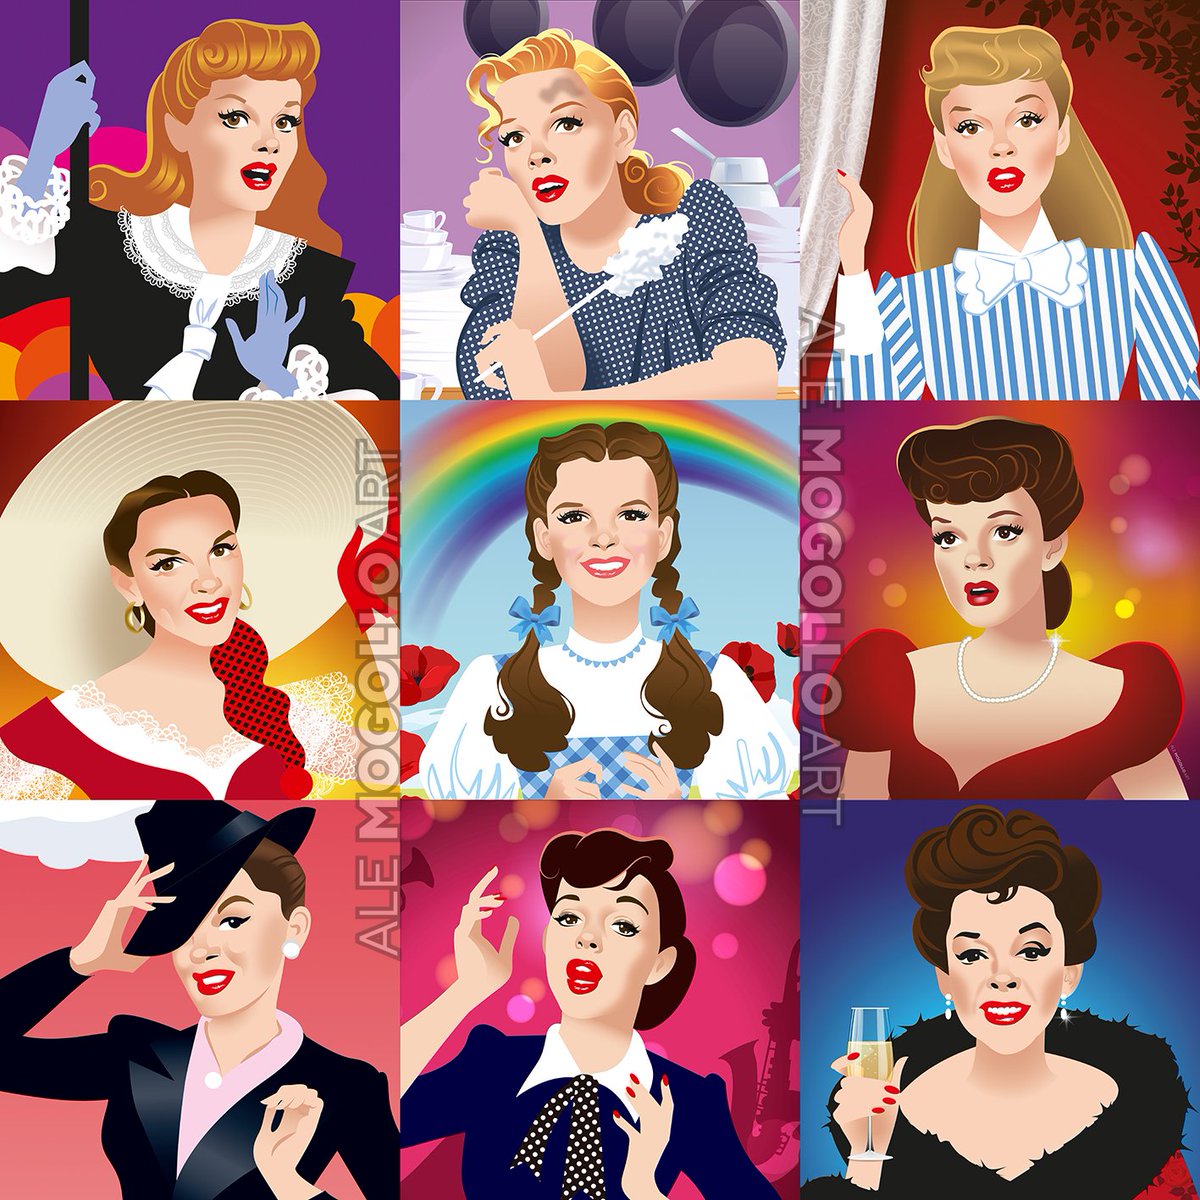 Remembering the icon, the incomparable Judy Garland on her birthday. Which is your favorite performance of hers?
#judygarland #judy #thewizardofoz #meetmeinstlouis #thepirate #astarisborn #gethappy #tilthecloudsrollby #rainbow #pride #gay #alejandromogolloart